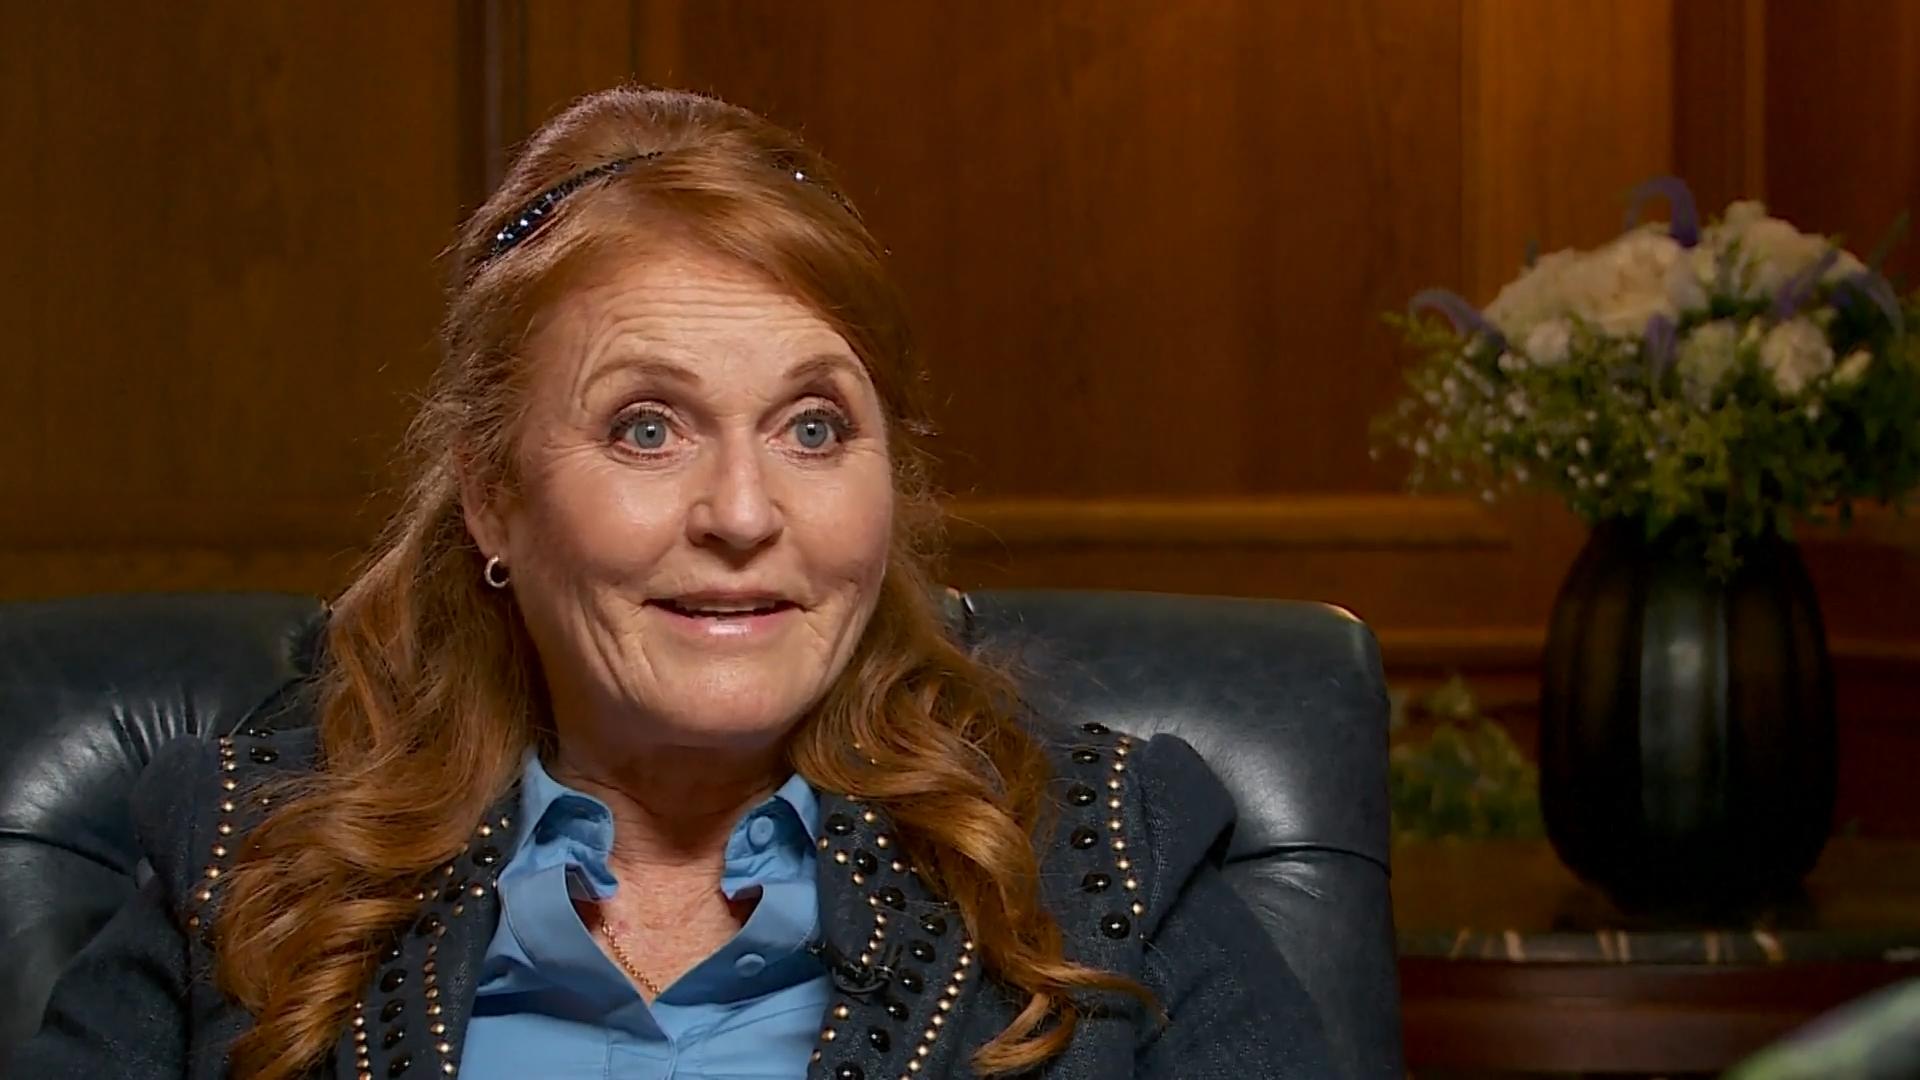 Sarah Ferguson gushes over the Queen's Unusual Declaration of Love